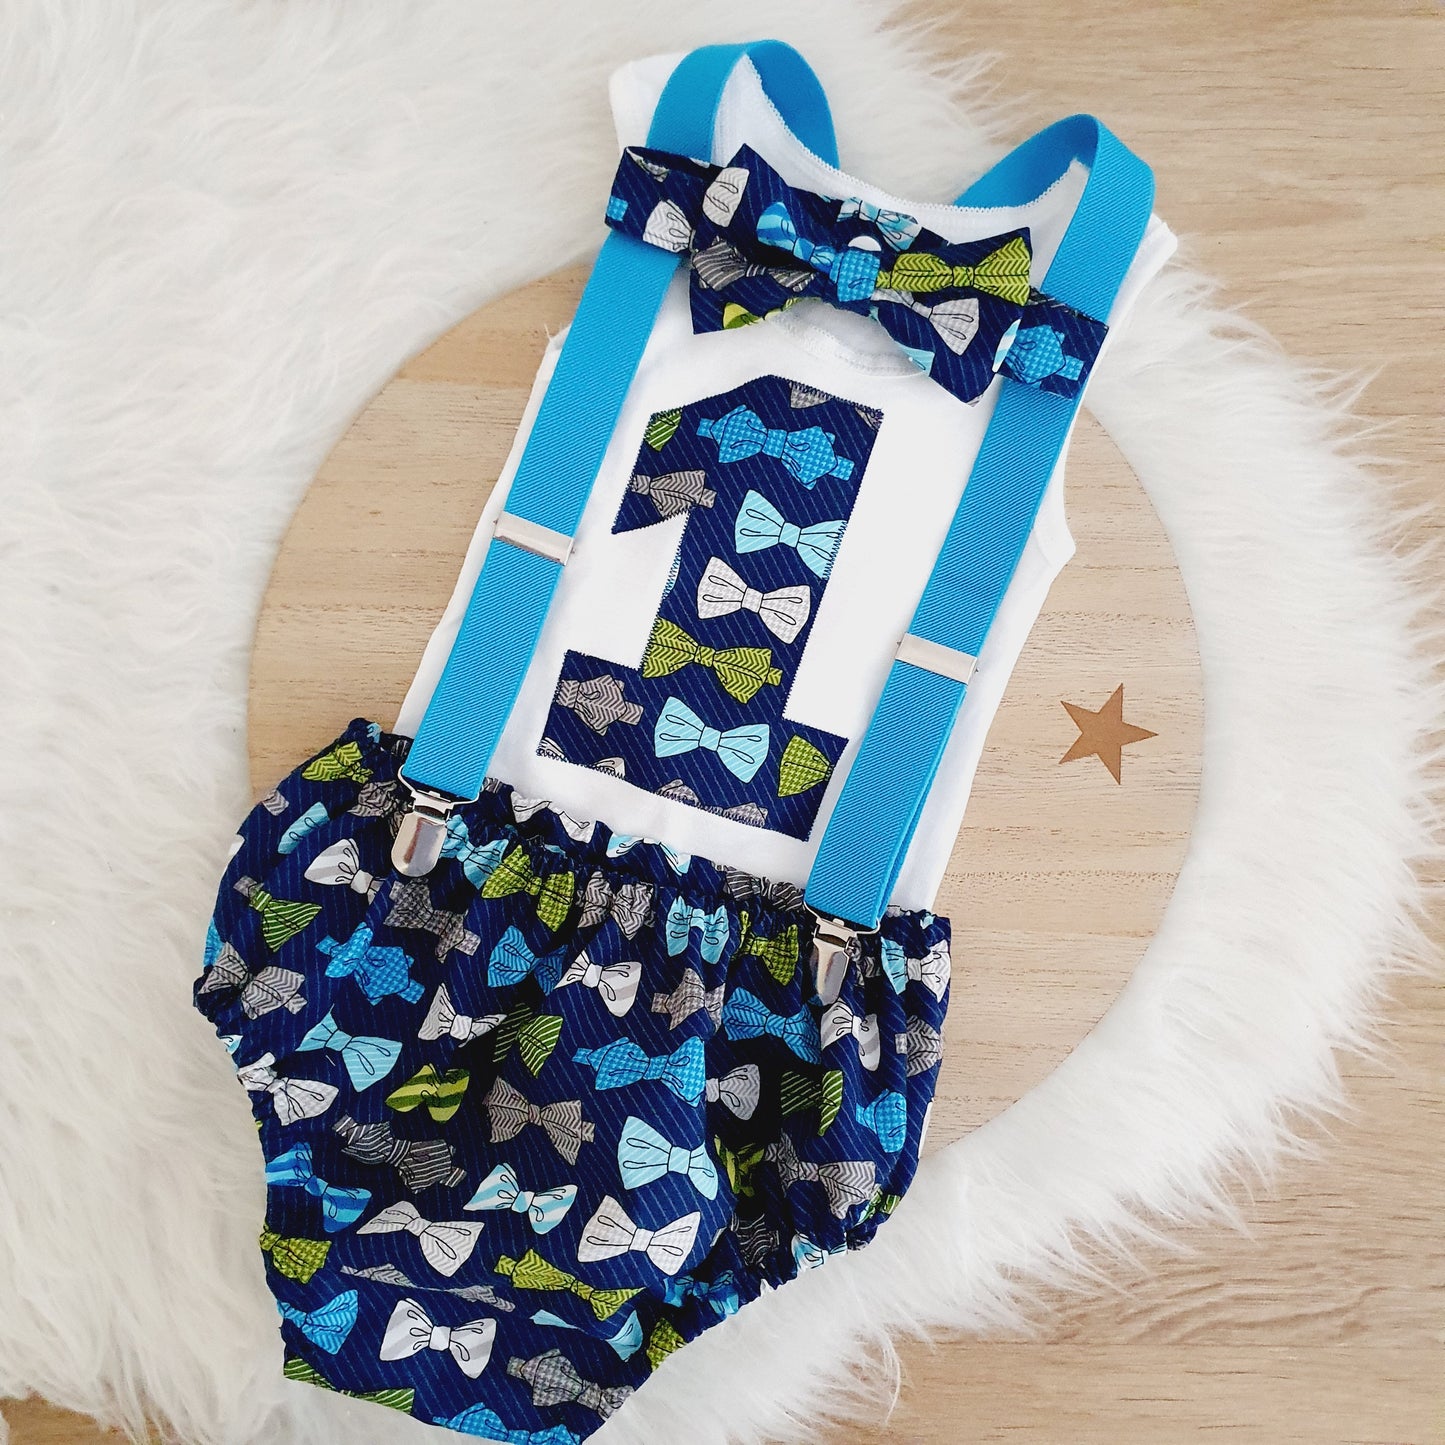 BOW TIES print Boys 1st Birthday - Cake Smash Outfit - Baby Boys First Birthday Photoshoot Clothing - Size 1, Nappy Cover, Tie, Suspenders & Singlet Set